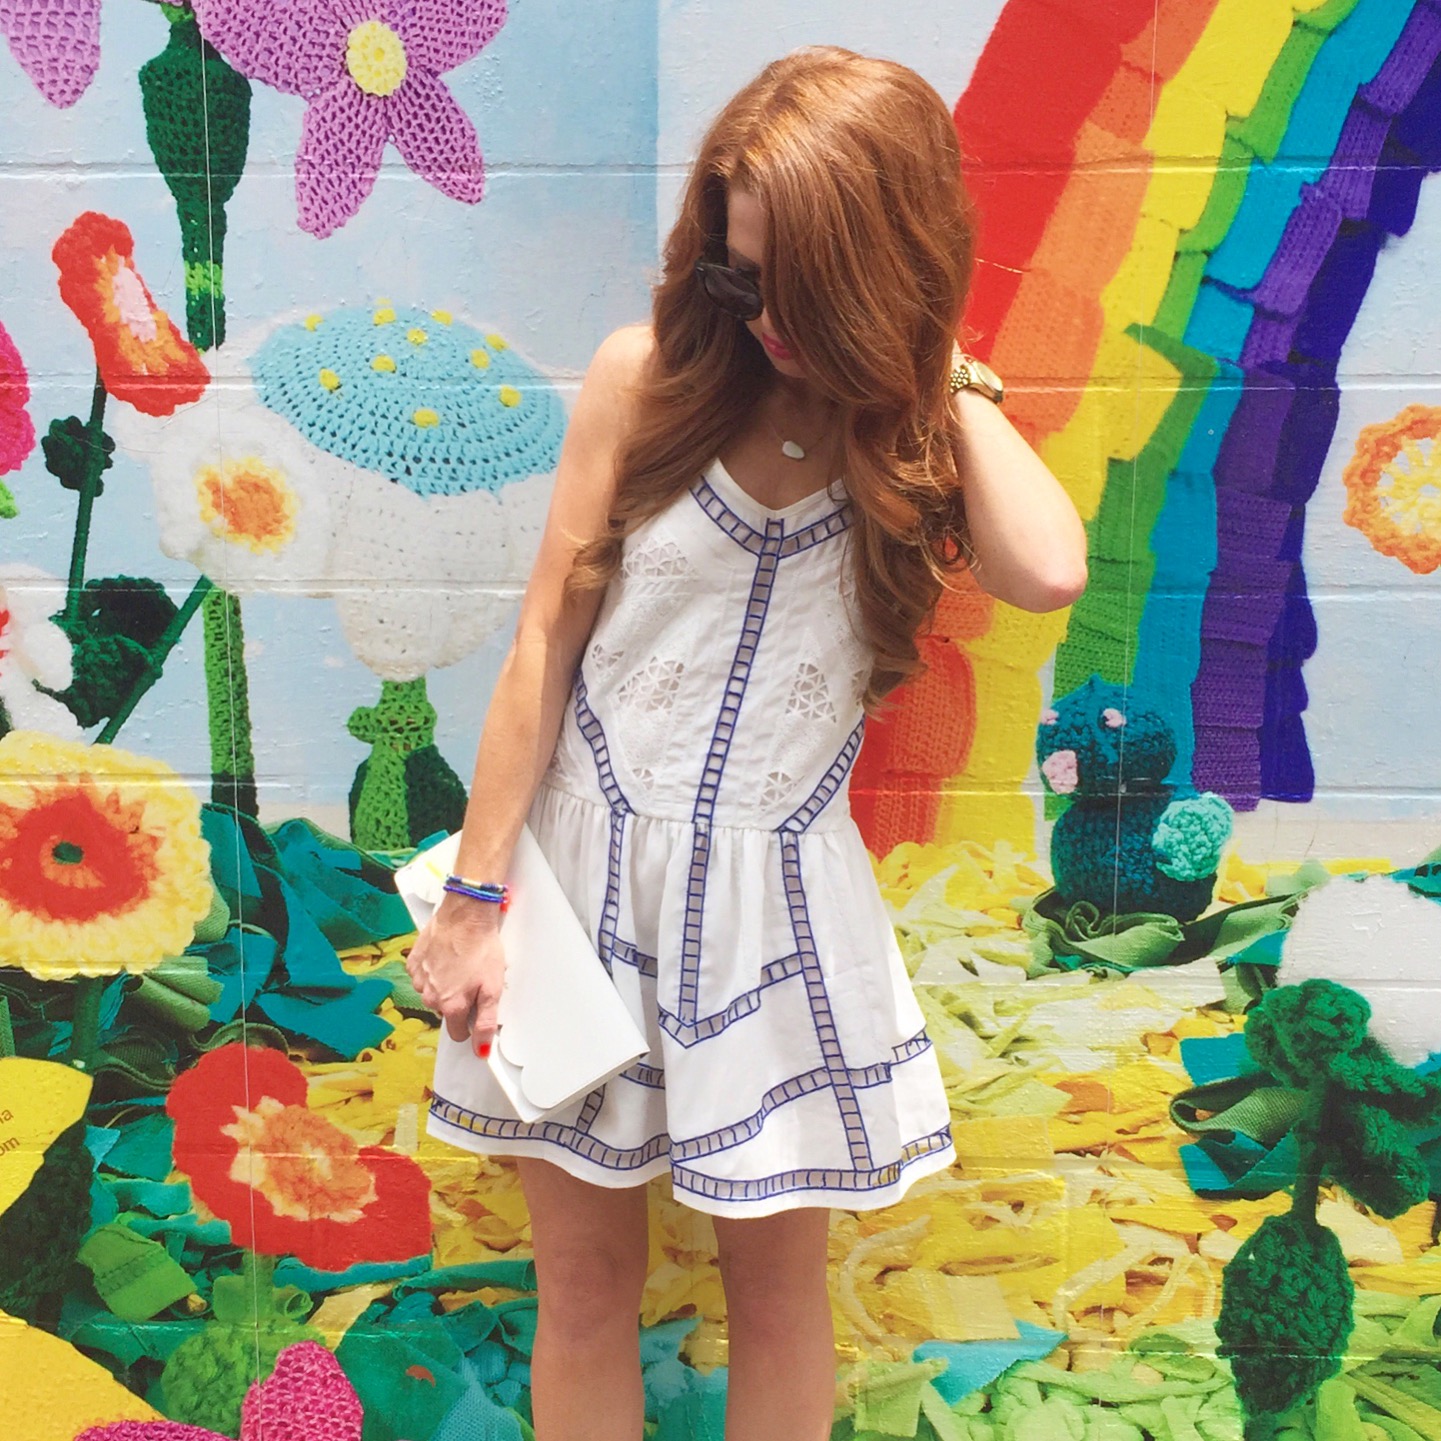 Insta Round-up! - Jimmy Choos & Tennis Shoes